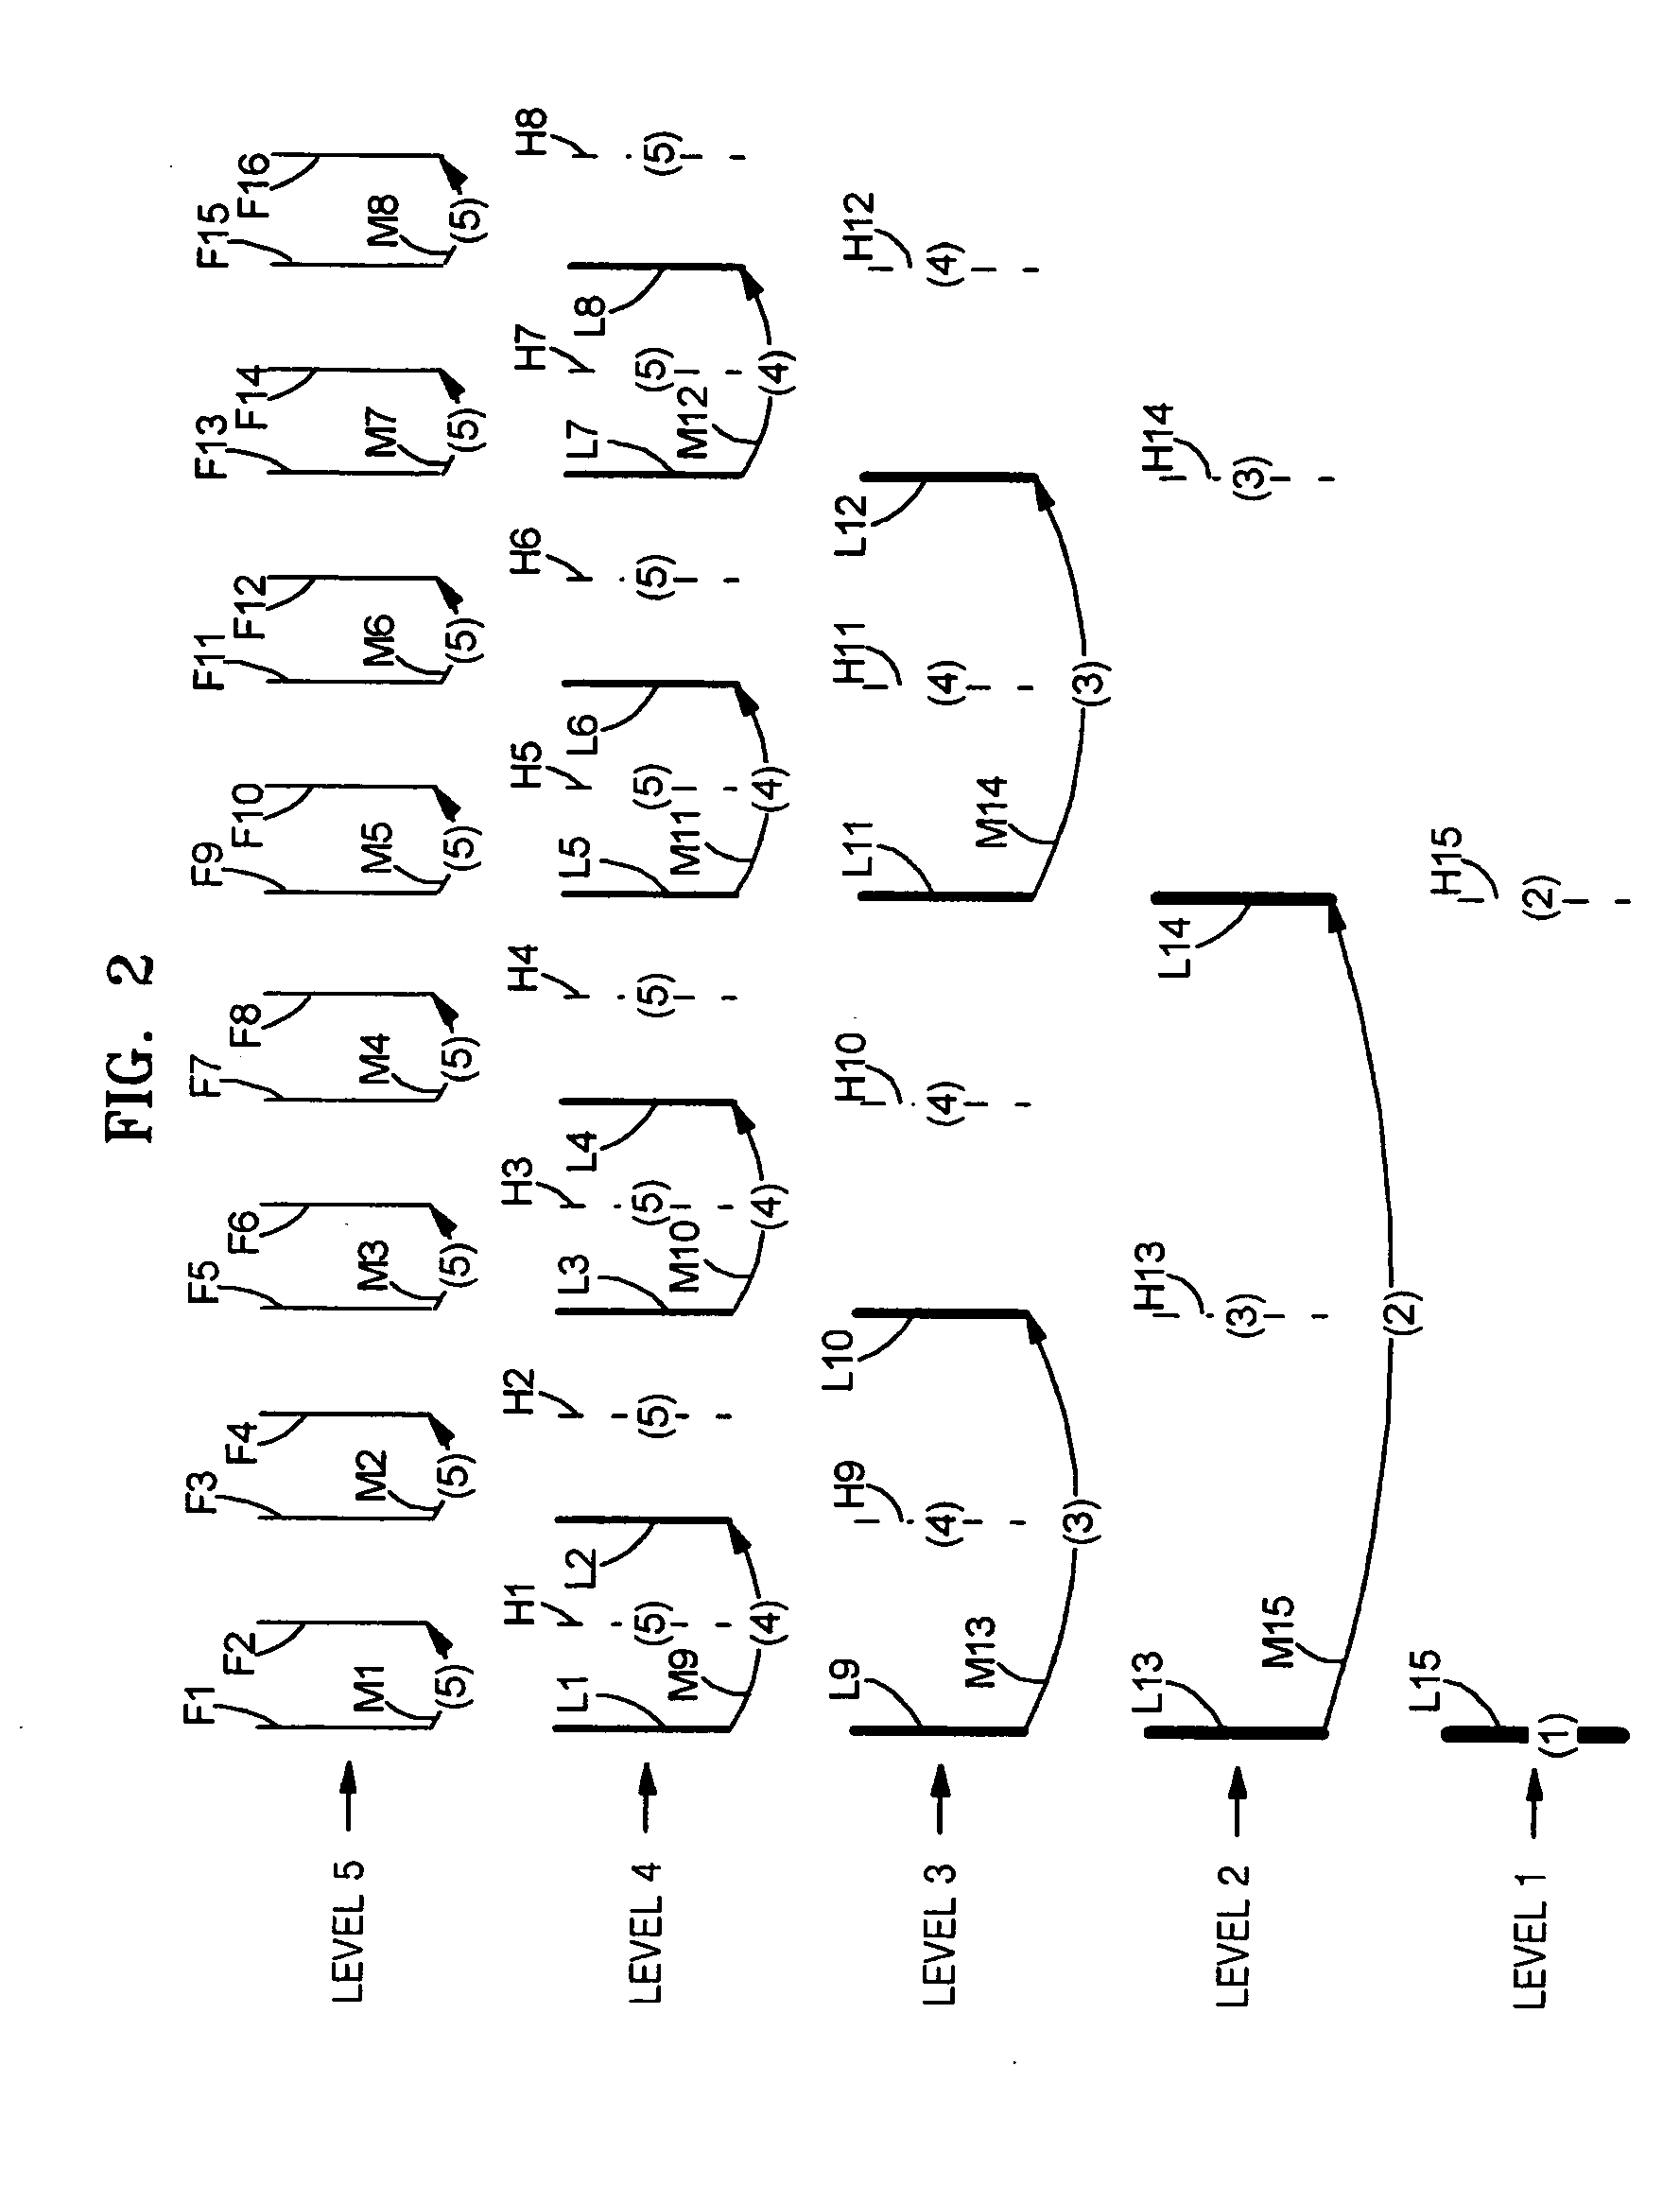 Method and apparatus for scalable motion vector coding